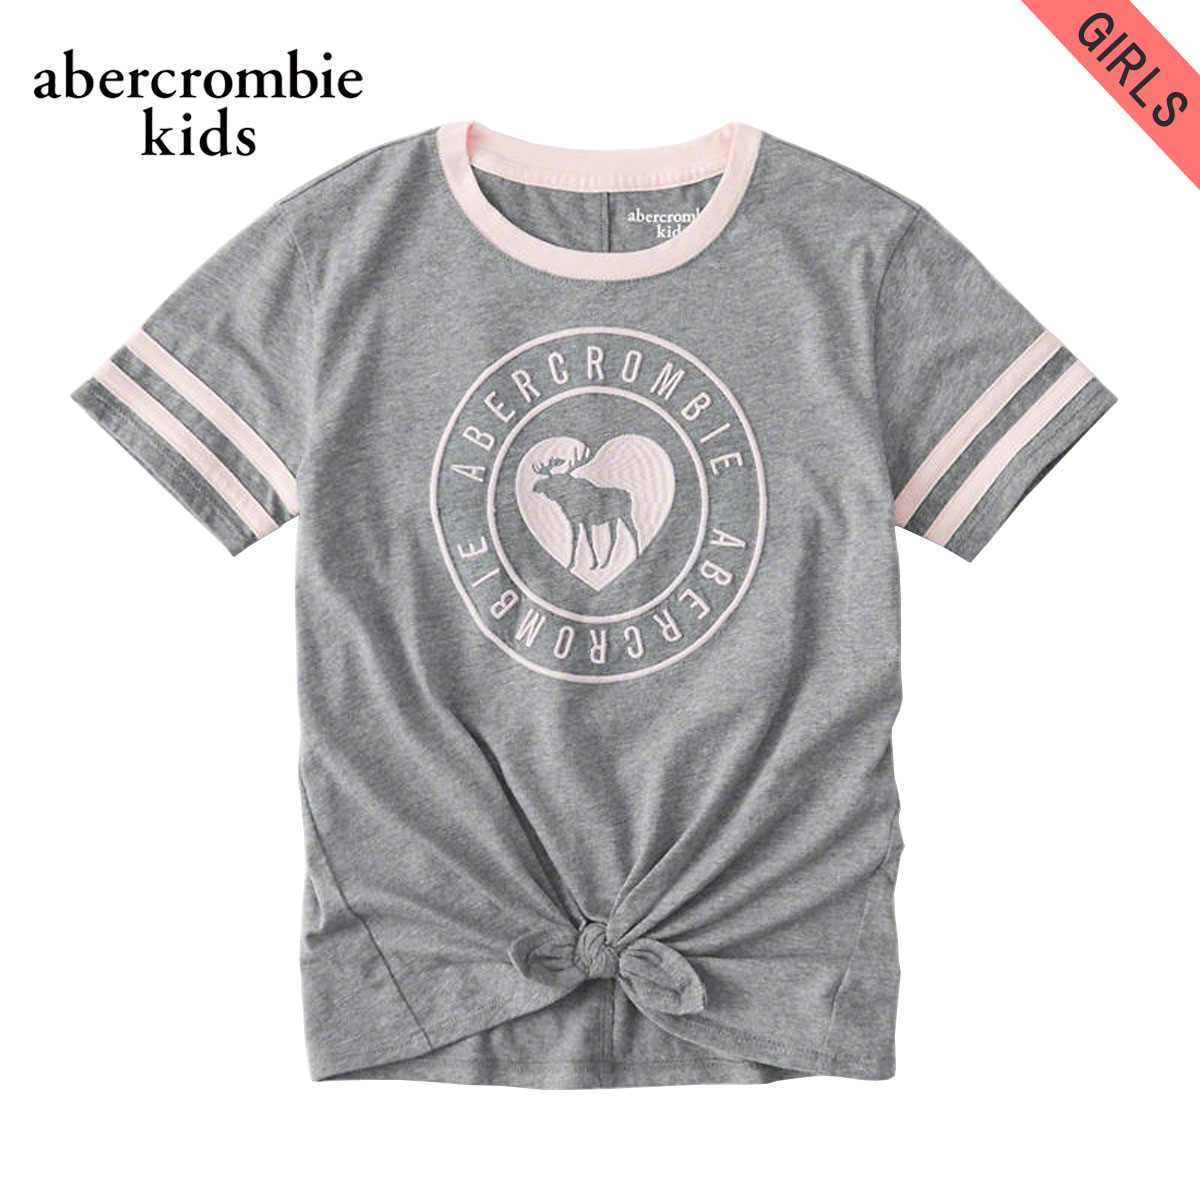 10%OFFクーポンセール  アバクロキッズ Tシャツ 子供服 正規品 AbercrombieKids 半袖Tシャツ sporty tie-front graphic tee 257-891-0100-010